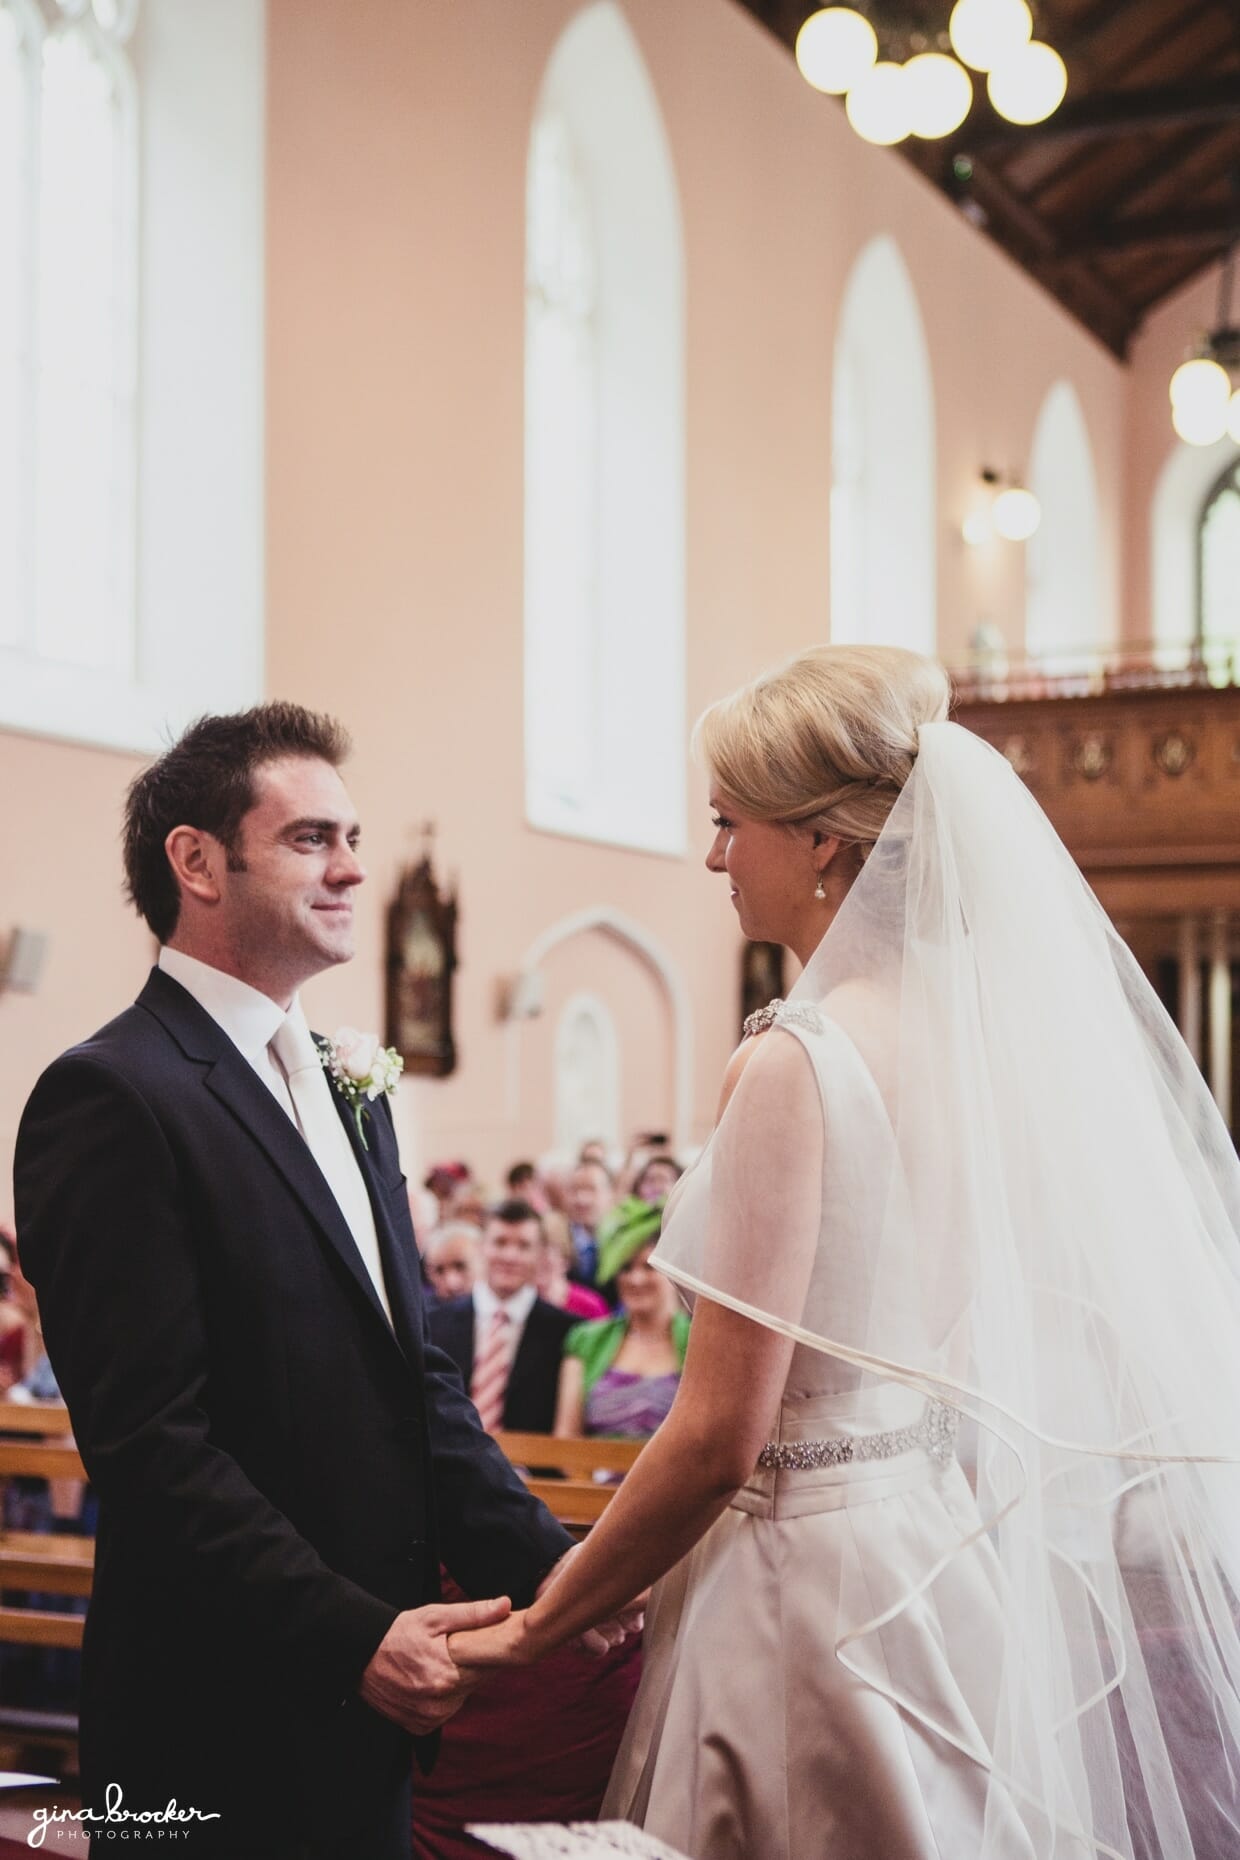 The bride and groom say their wedding vows during their religious ceremony in a church